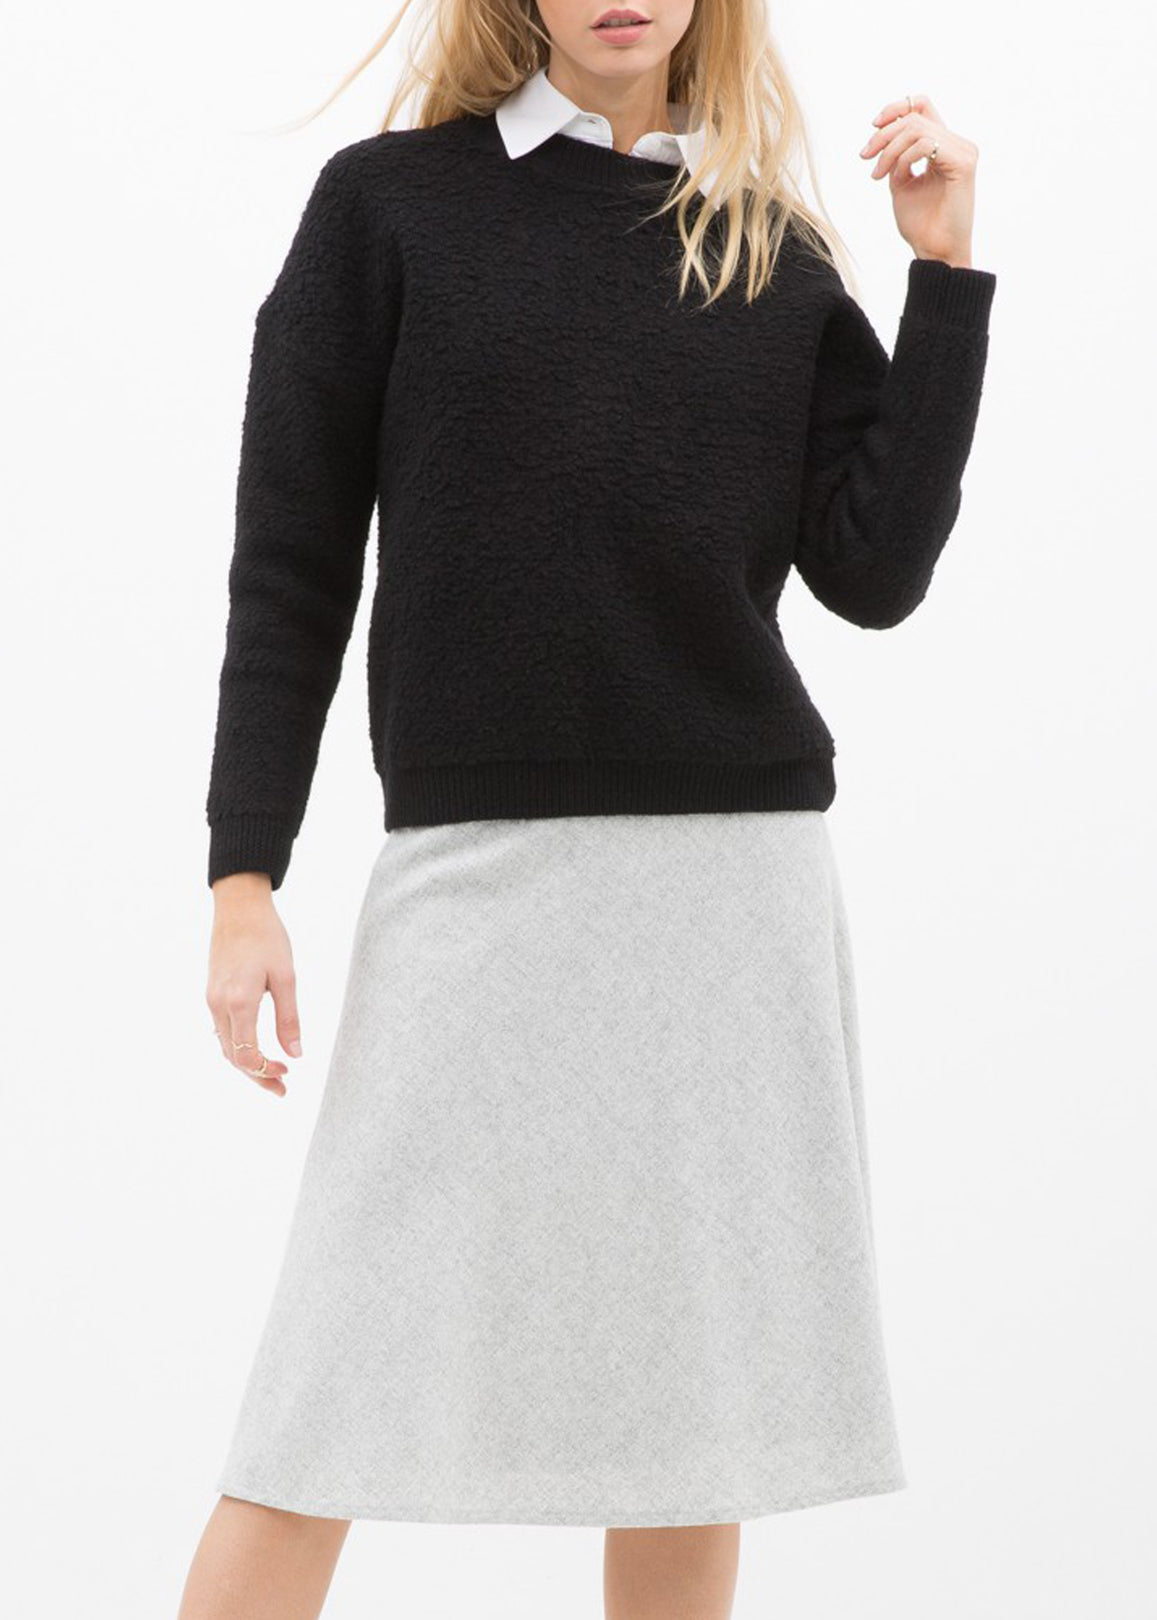 High Waisted Wool Knit Midi Skirt In Heather Grey by Shop at Konus